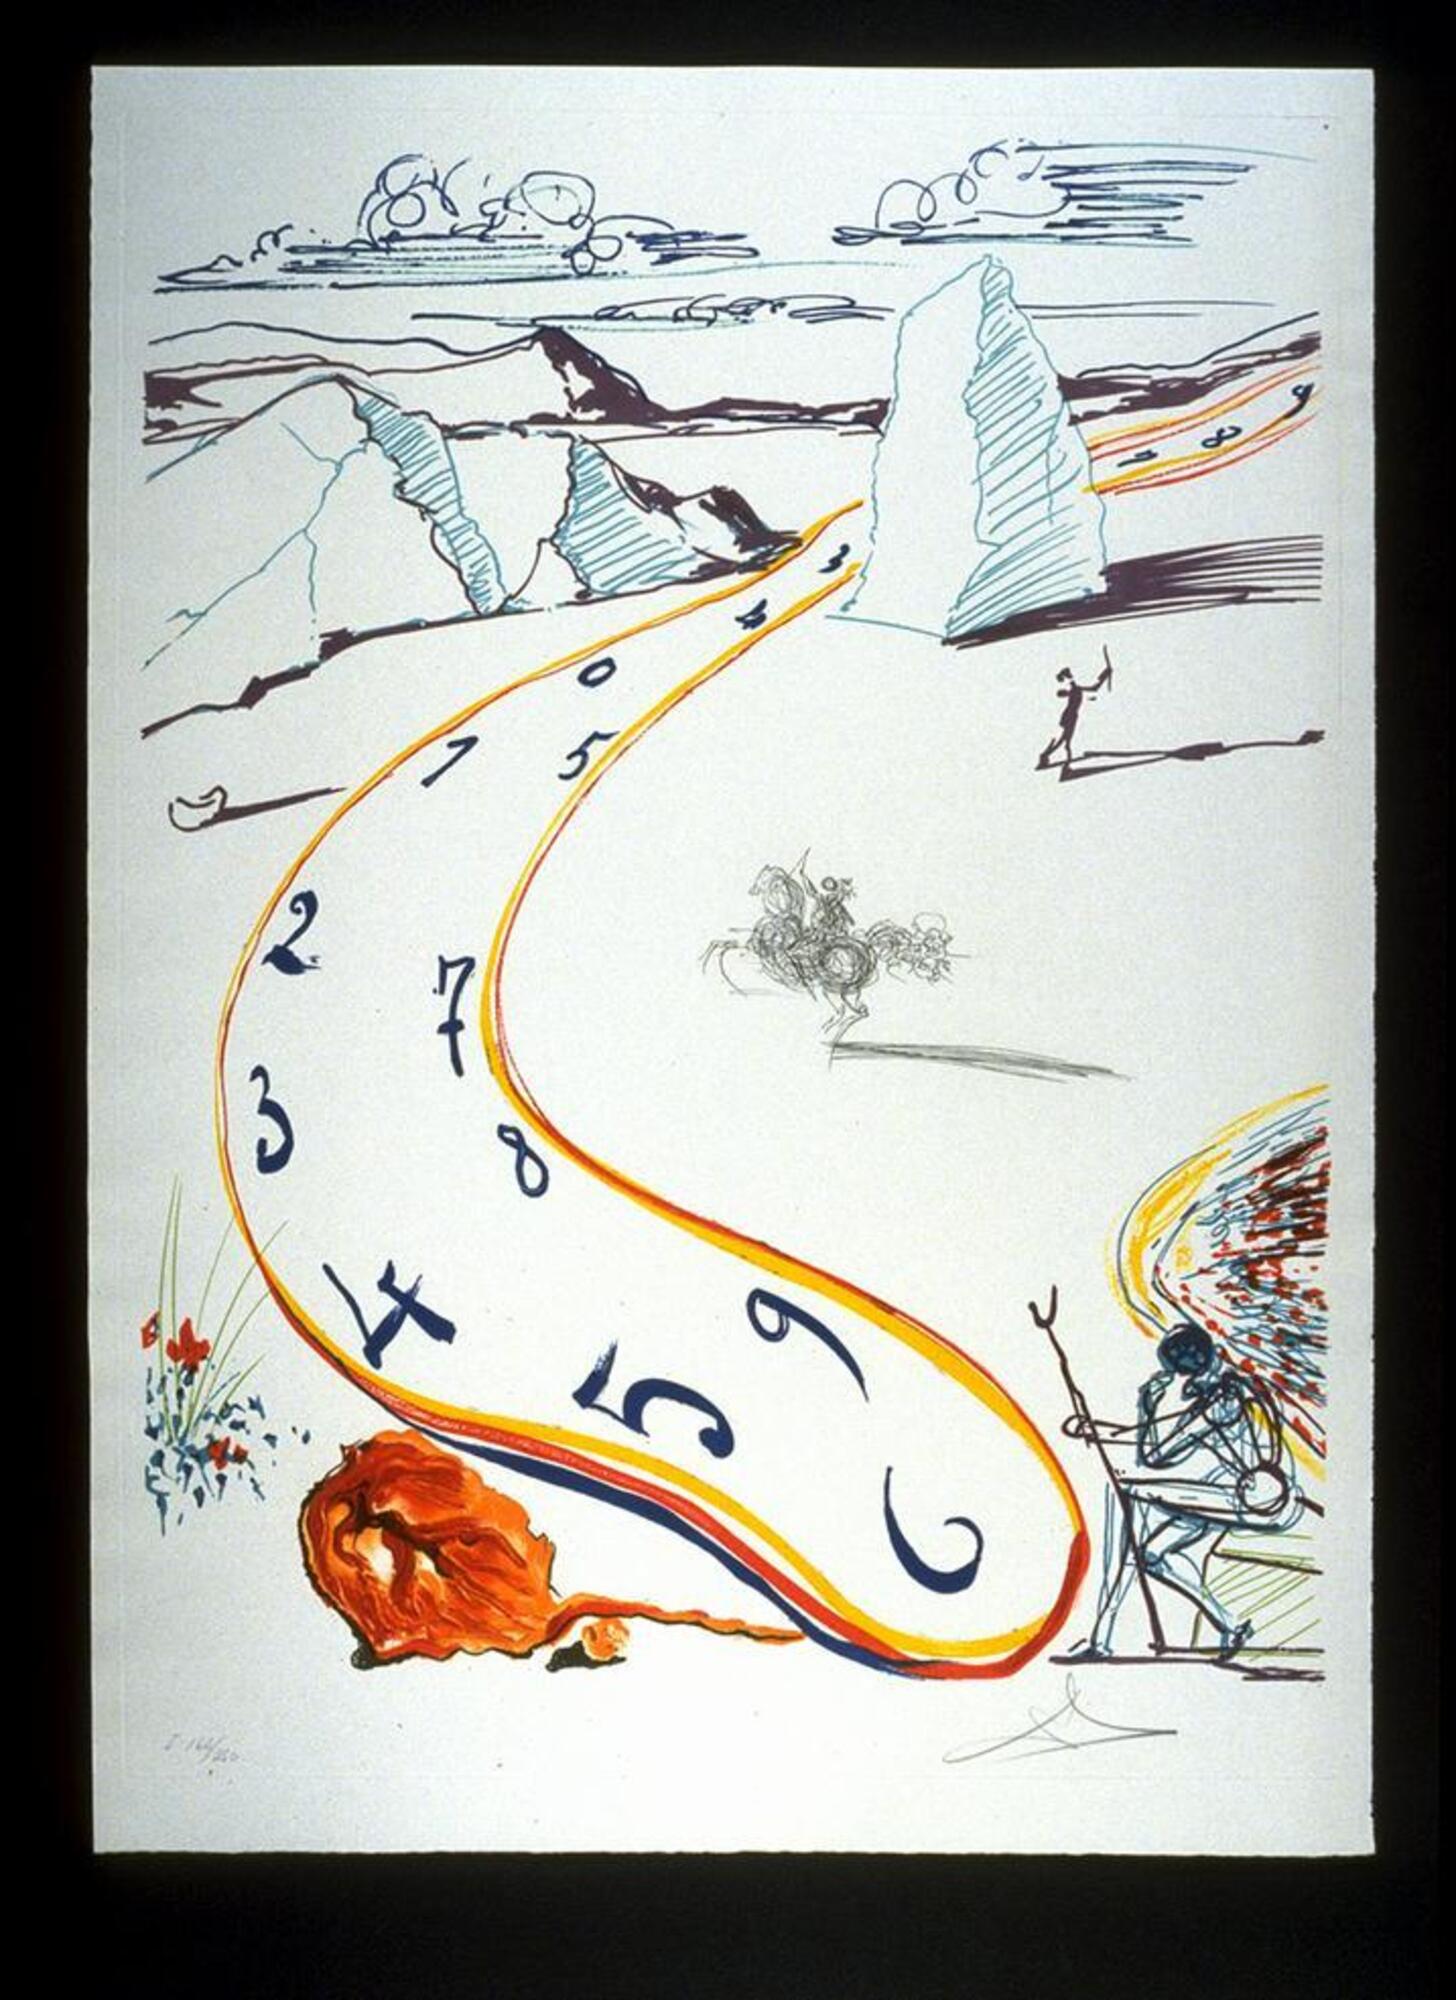 Winding through the center of this print, a melting clock oozes from the top right to the bottom center in red, yellow and blue. To the left of the base of the clock is a bright orange and red bolder. In the background, there is a large landscape with mountains and a cloudy sky. There are three figures in the scene. At the bottom right, a figure is seated with a staff and behind it is a large shape in yellow, red and blue. At the center, there is a sketch of a mounted figure on a rearing horse; and at the upper right, there is a figure with a strong shadow. The print is signed (l.r.) and numbered (l.l.) in pencil. 